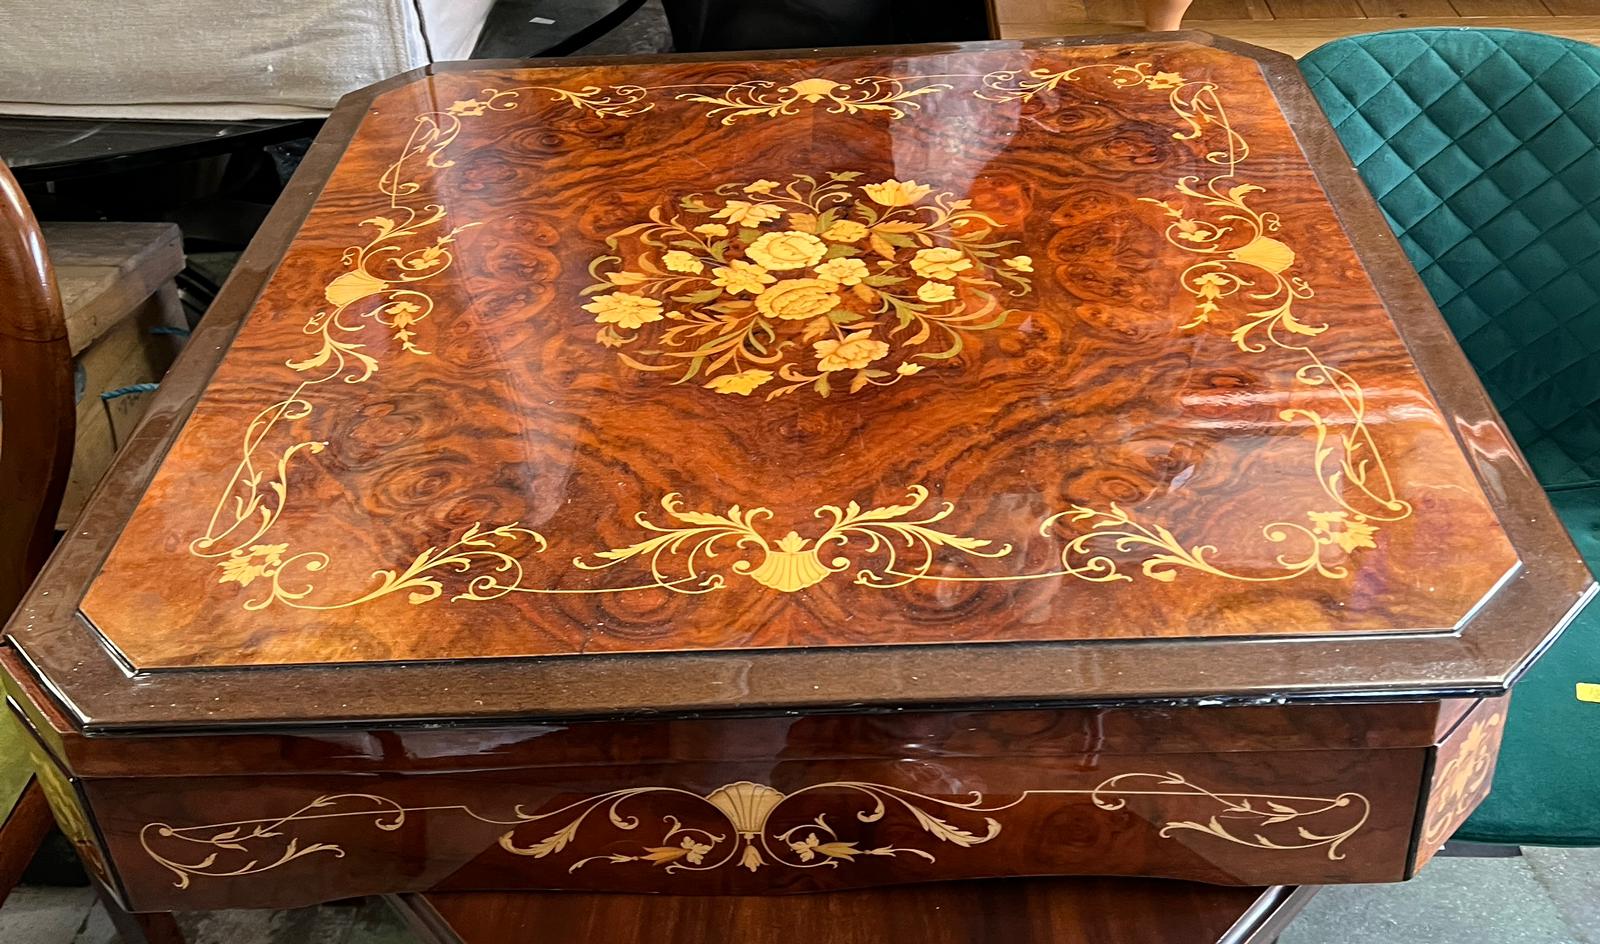 An Italian inlaid games table with roulette, chest and including games pieces